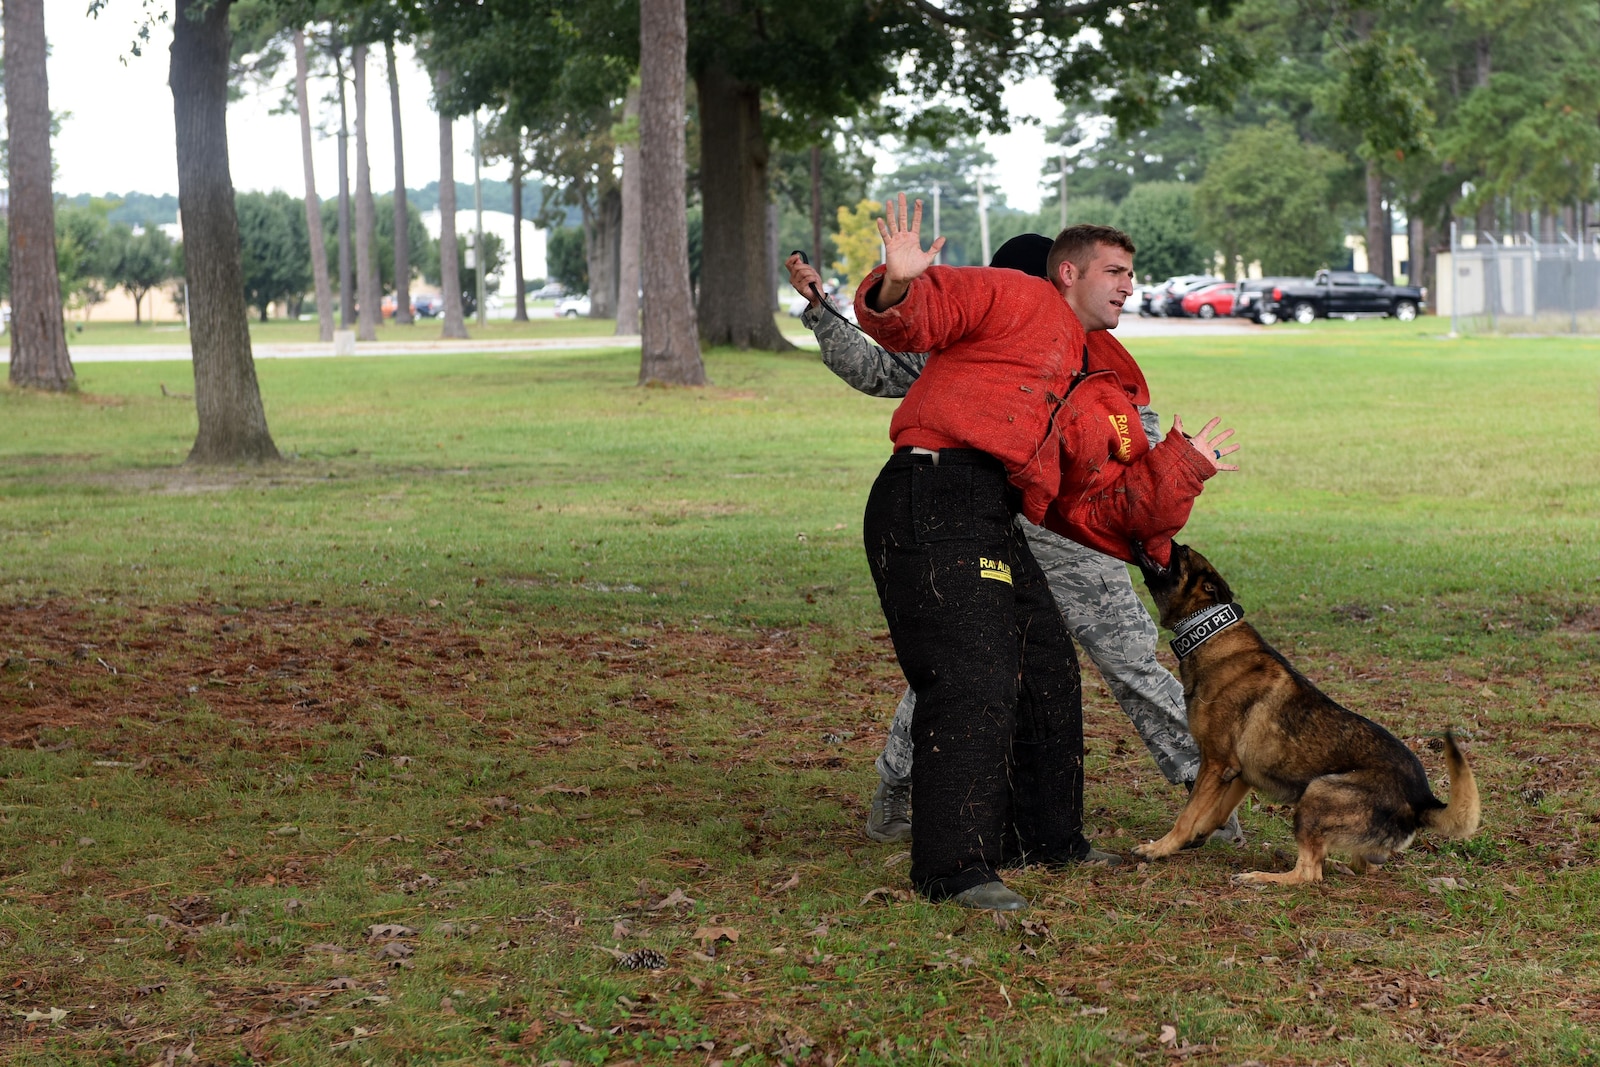 Staff Sgt. Austin Craven, 4th Security Forces Squadron military working dog handler, demonstrates a military working dog seizure during the 4th Fighter Wing 75th Anniversary tour, Sept. 15, 2017, at Seymour Johnson Air Force Base, North Carolina. During the tour, members of the Fire Department, security forces, MWD and explosive ordnance disposal held different stations and demonstrated the supporting units that support the 4th Fighter Wing mission. (U.S. Air Force photo by Airman 1st Class Miranda A. Loera)